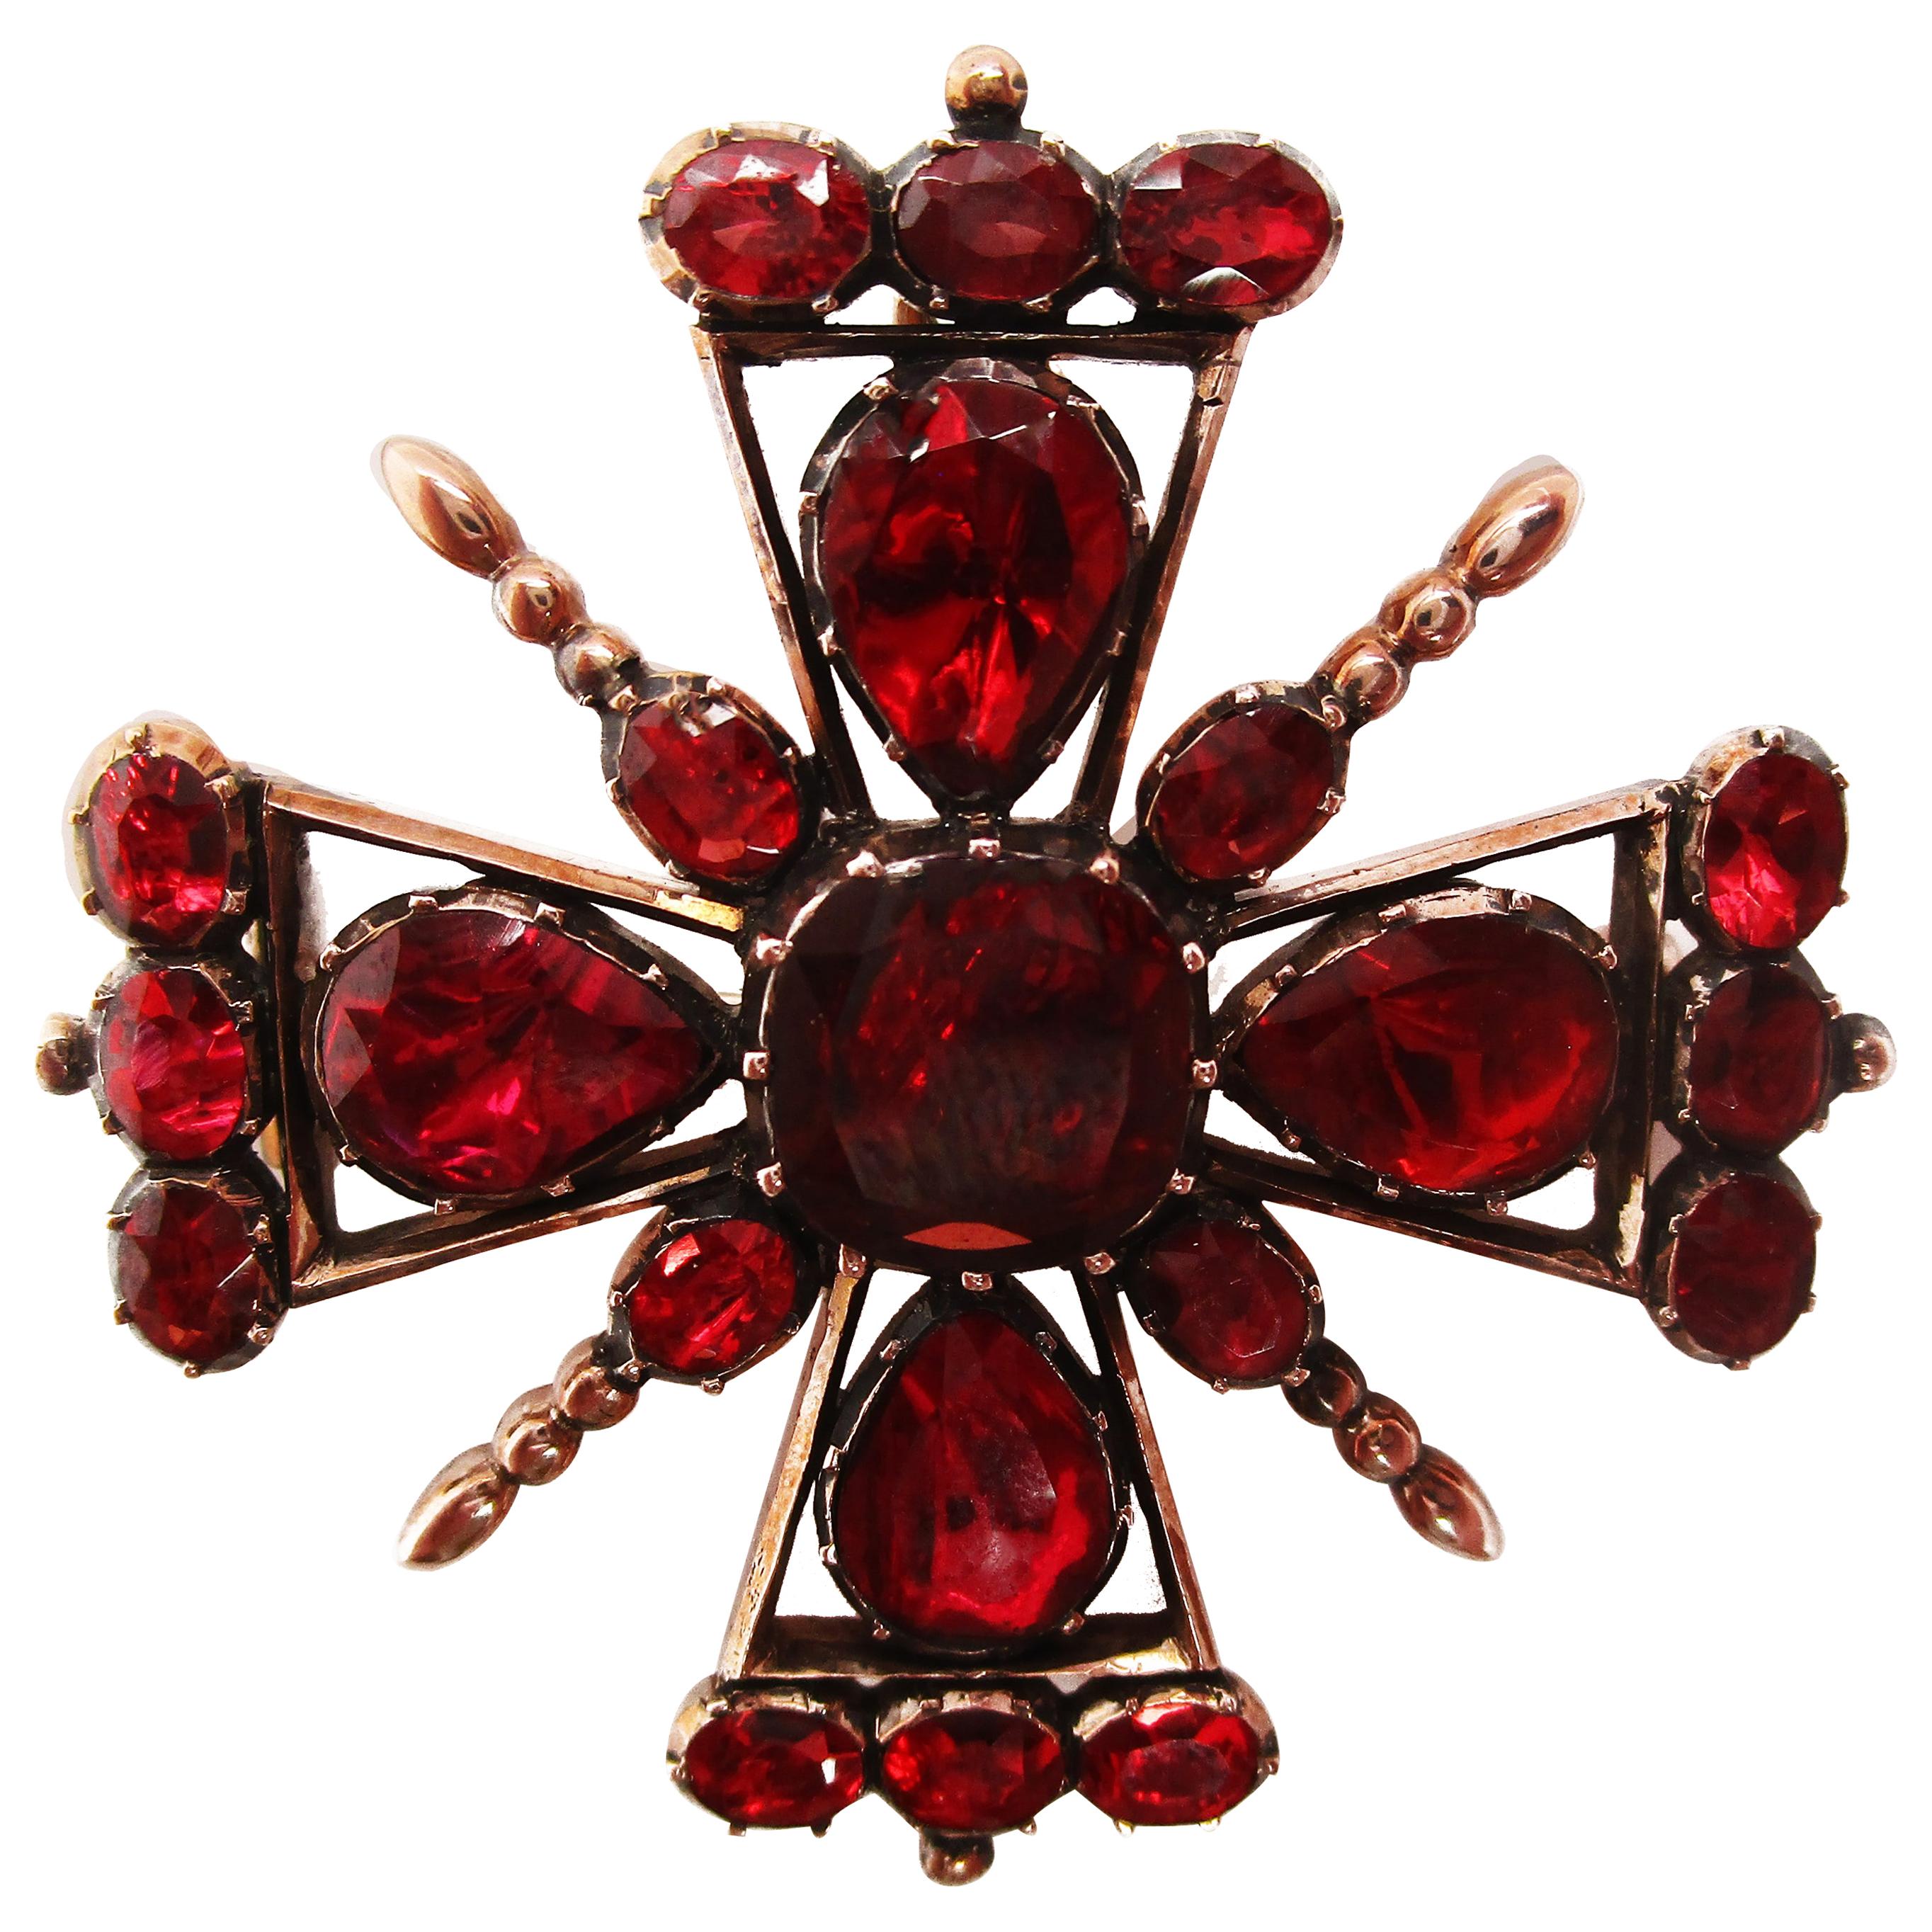 This fantastic pin pendant is in 12k rose gold and features some of the most beautiful garnets you will ever see! The contrast between deep red garnet and rose gold is enchanting and enthralling. The unique layout of the pin evokes a sense of